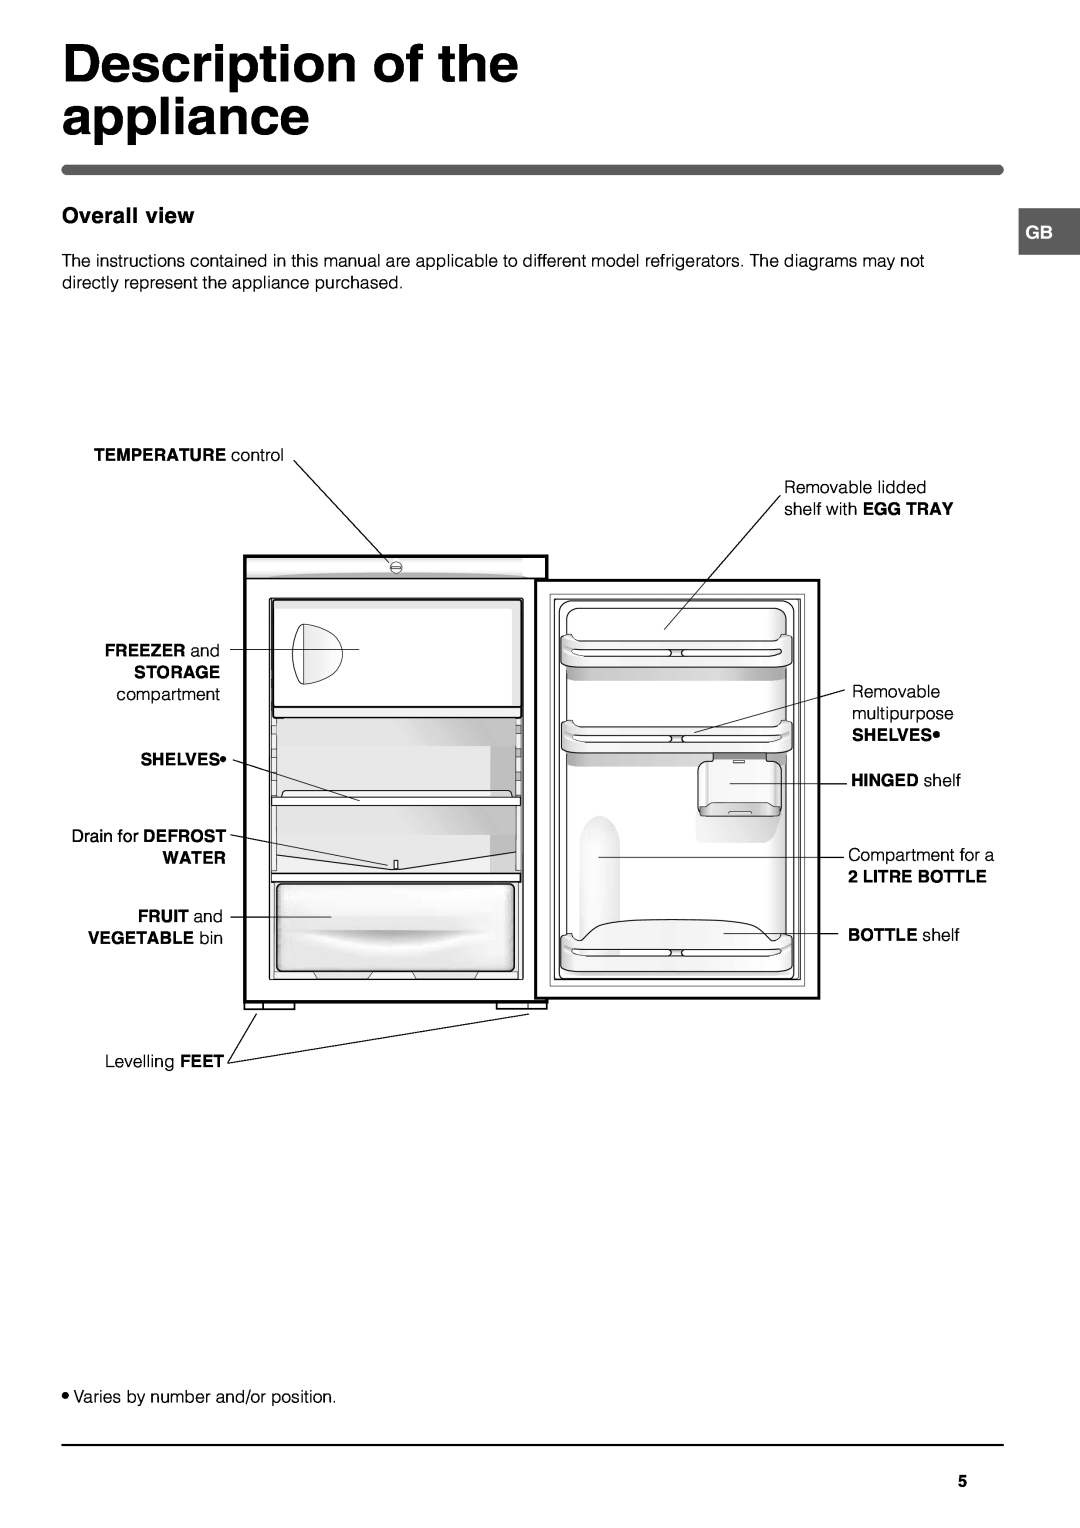 Indesit TFA1 Description of the appliance, Overall view, TEMPERATURE control, Water, FRUIT and, VEGETABLE bin 